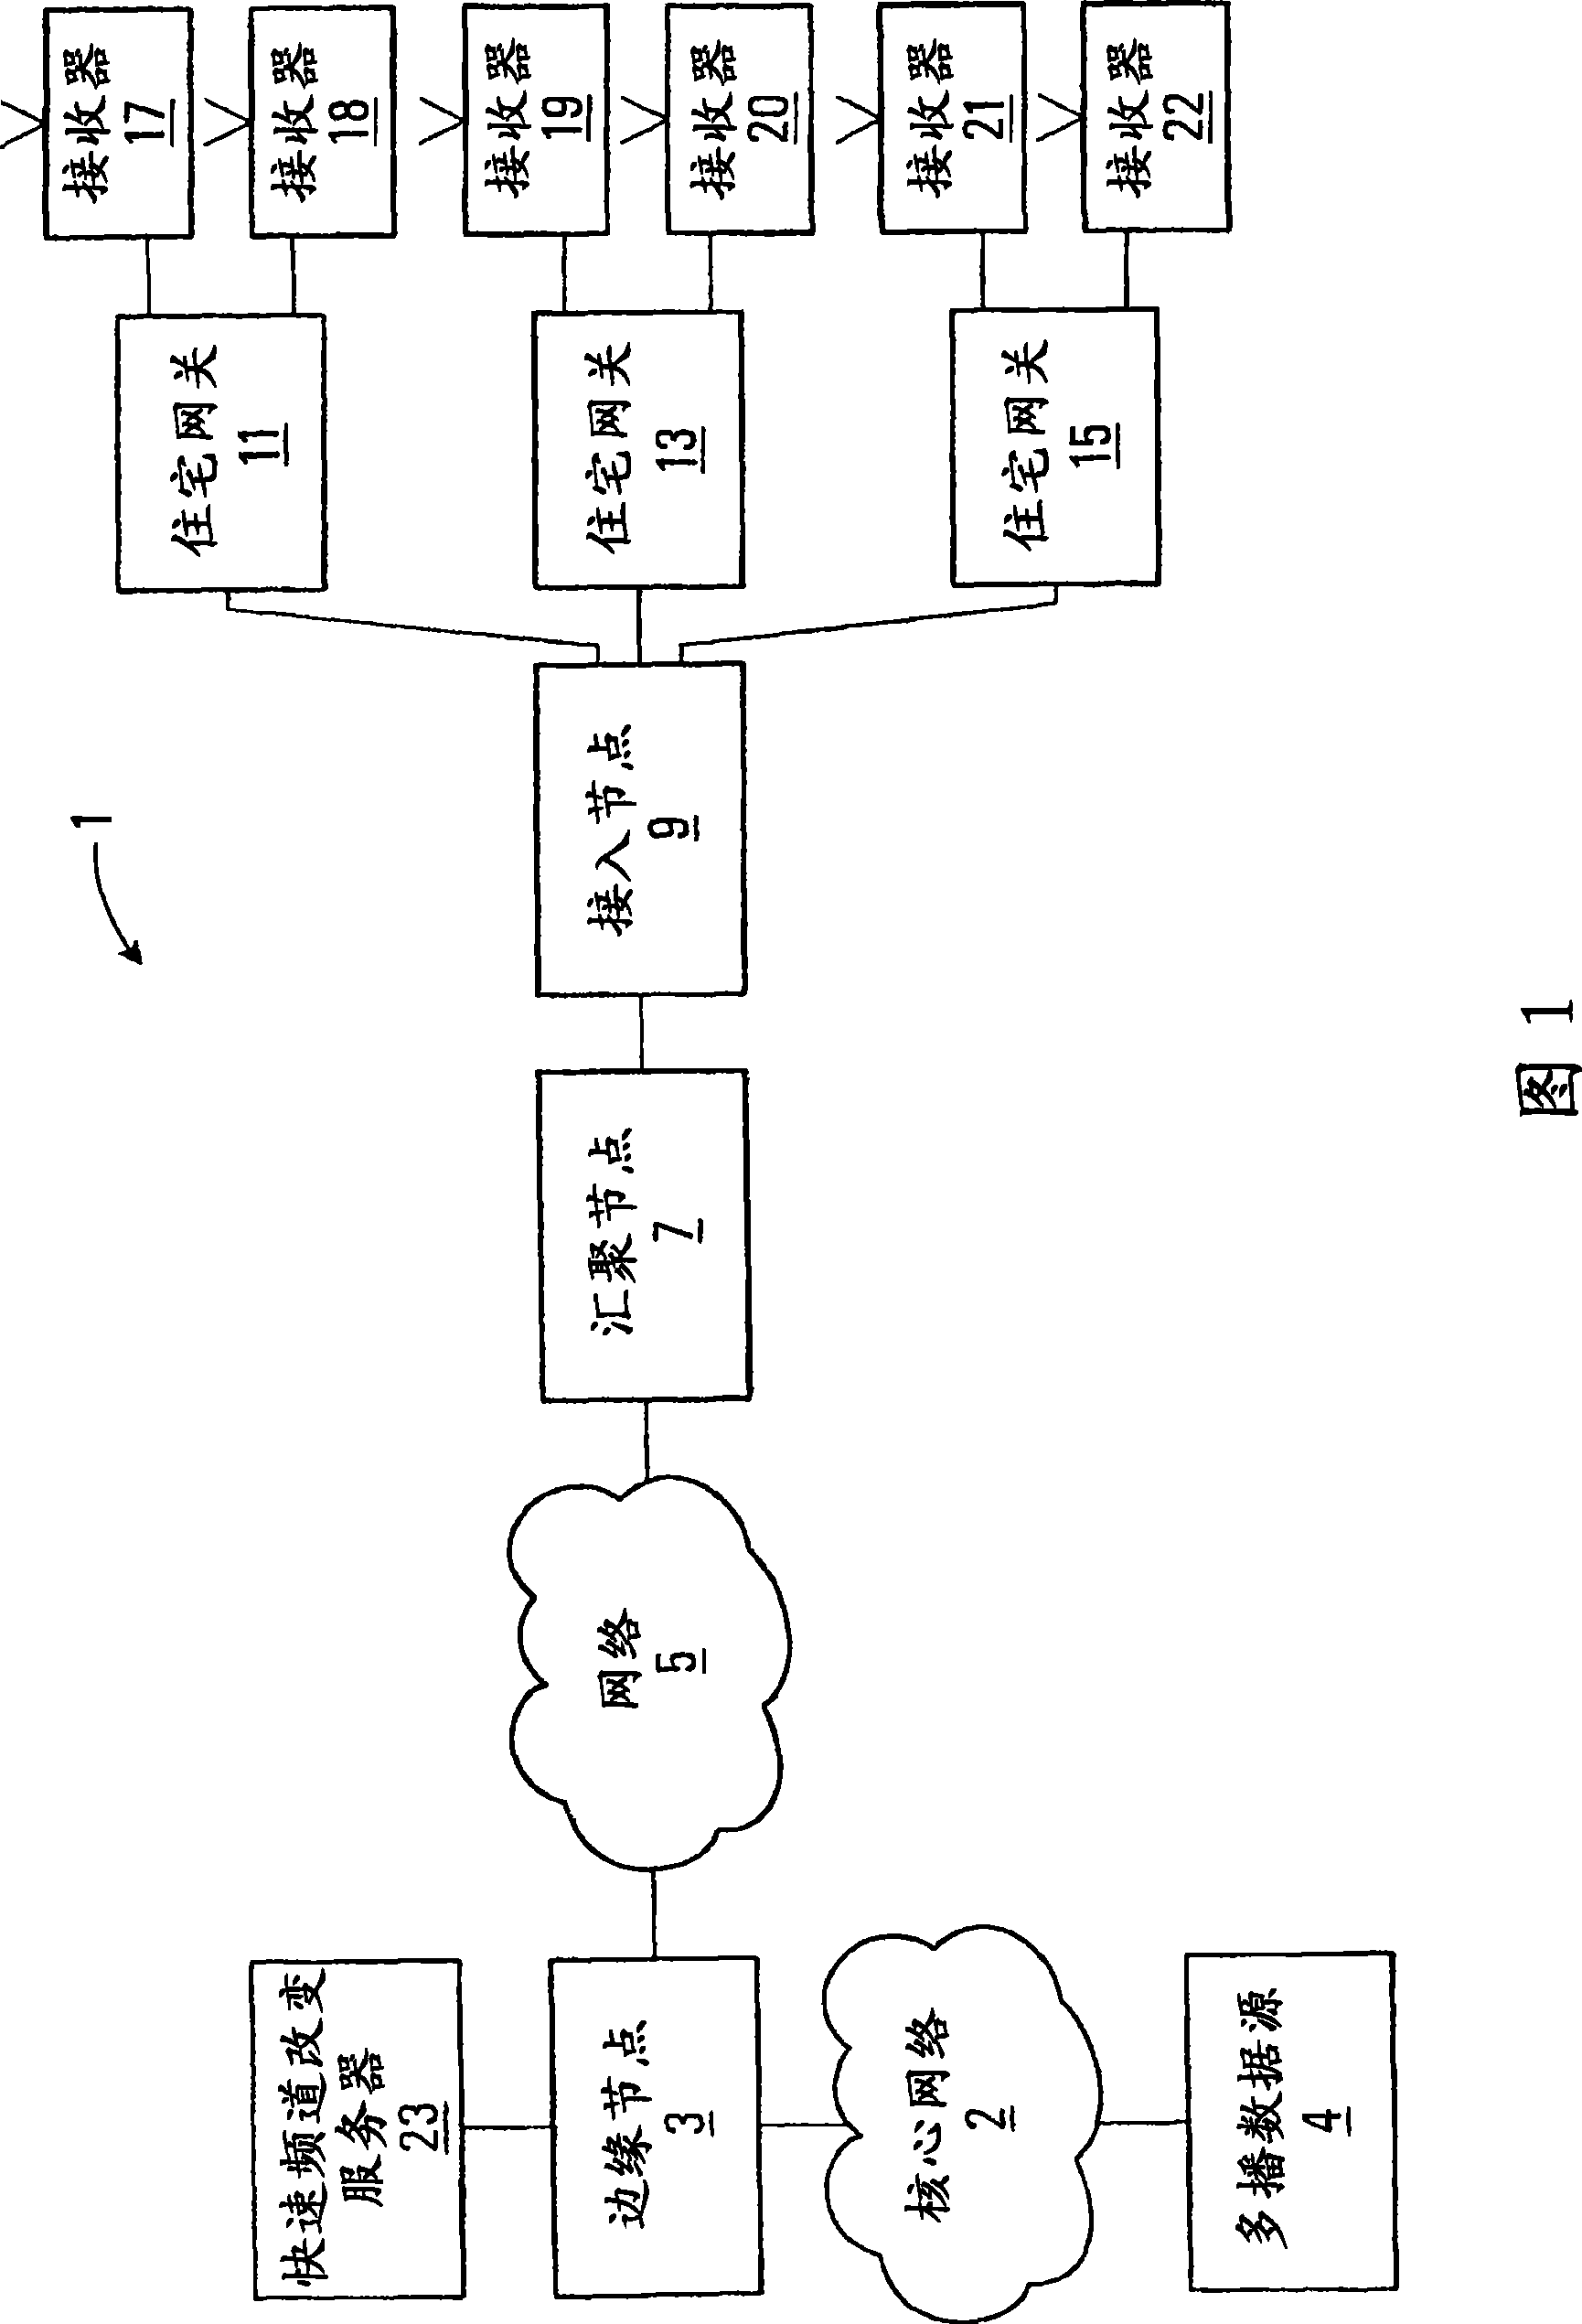 Apparatus for managing requests for data in a communication network